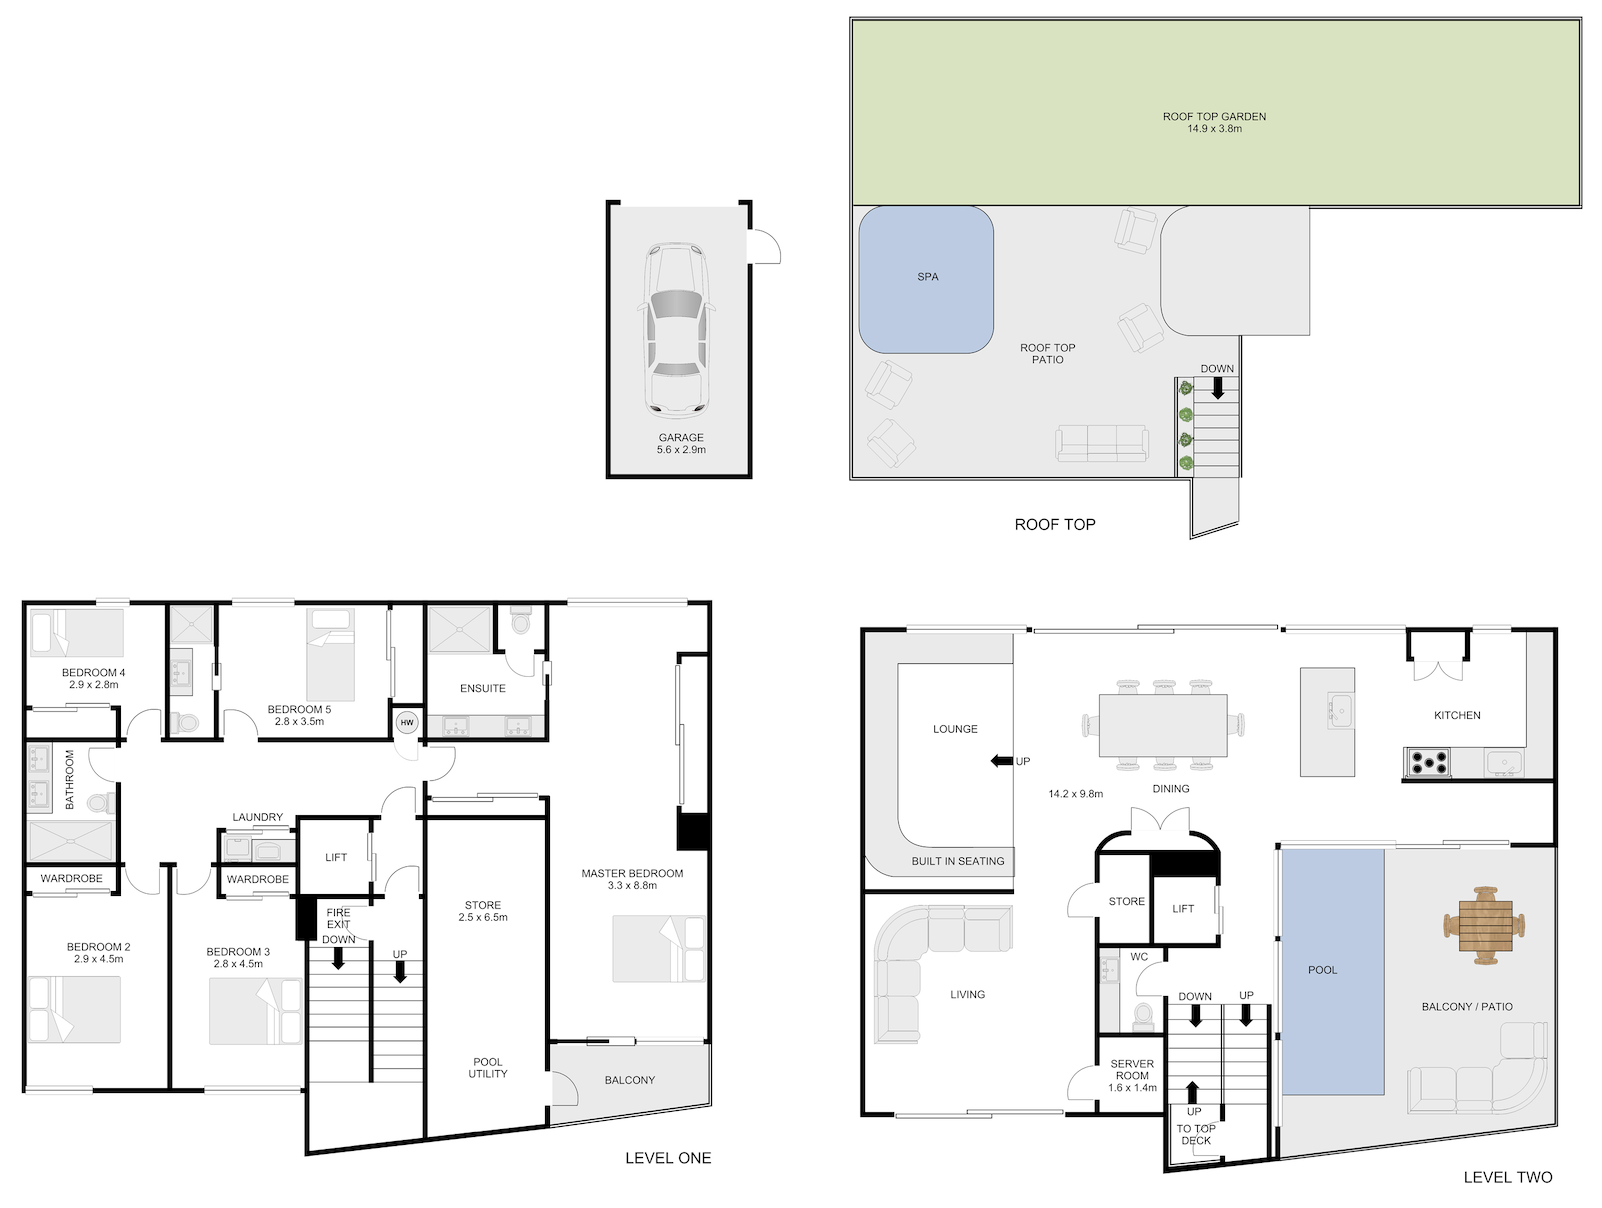 5 bed apartment for sale in Grey Lynn, Auckland - Property Floorplan